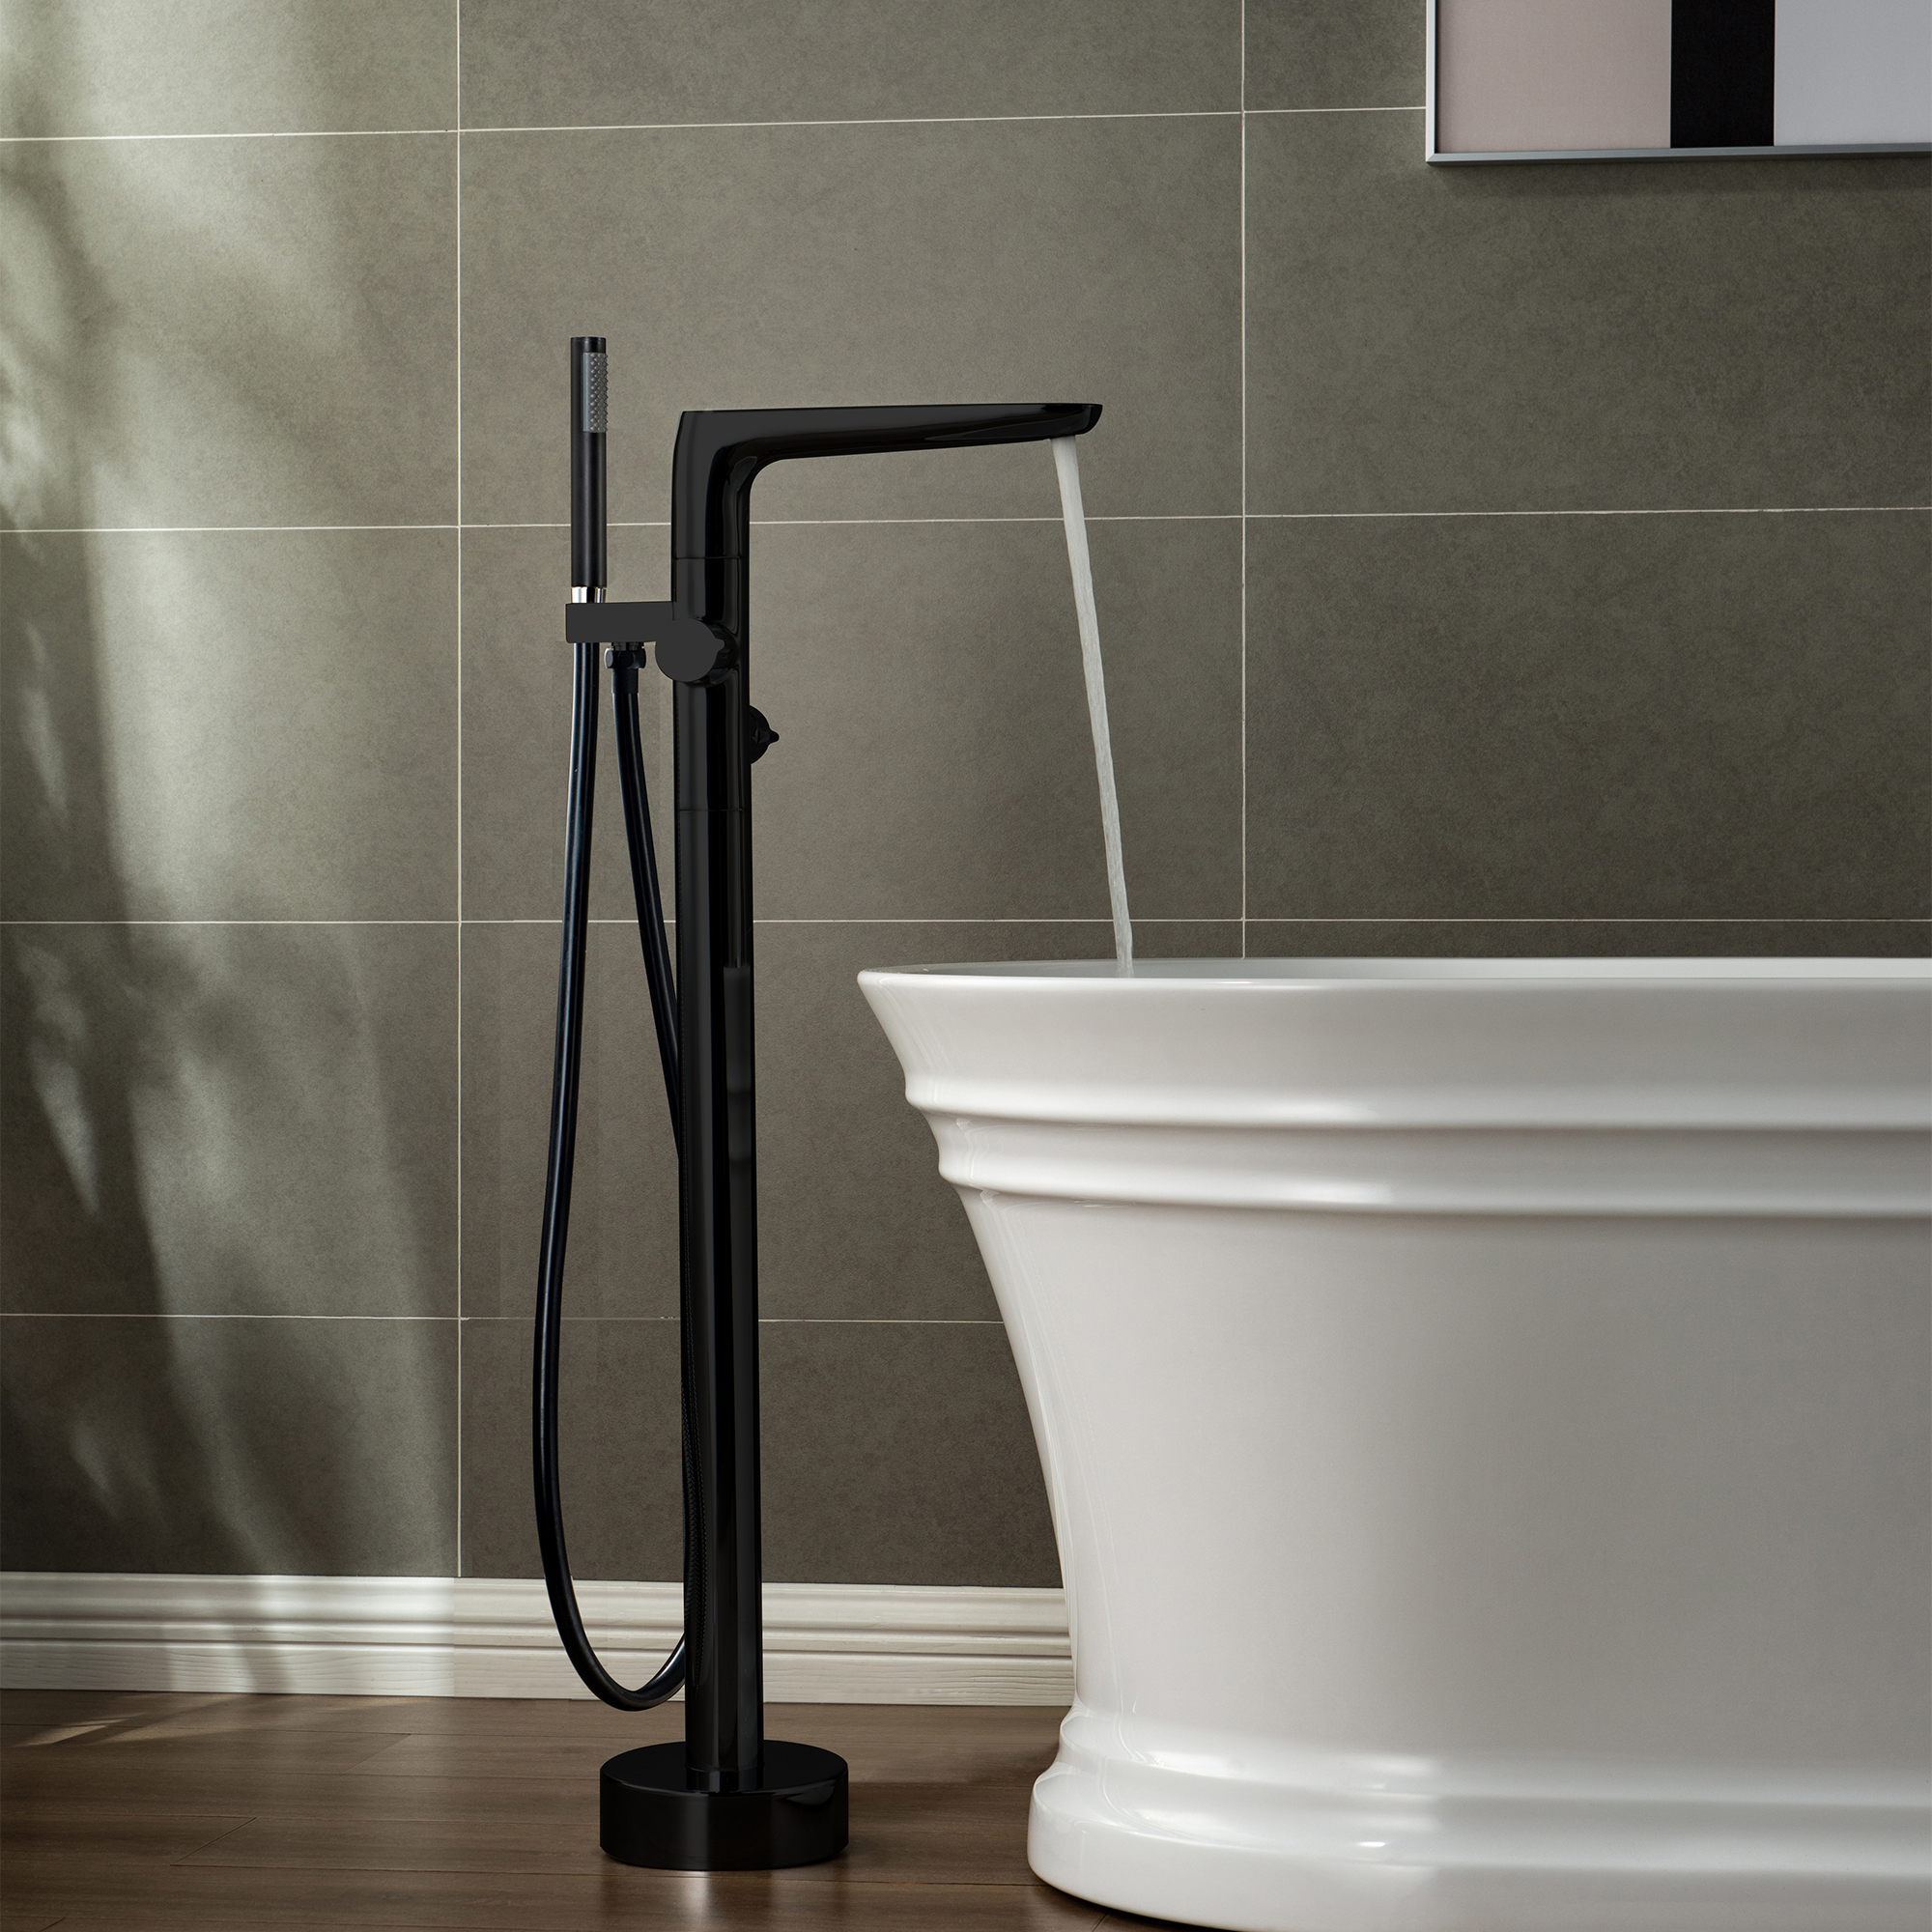 WOODBRIDGE F0015BL Contemporary Single Handle Floor Mount Freestanding Tub Filler Faucet with Hand shower in Matte Black Finish.